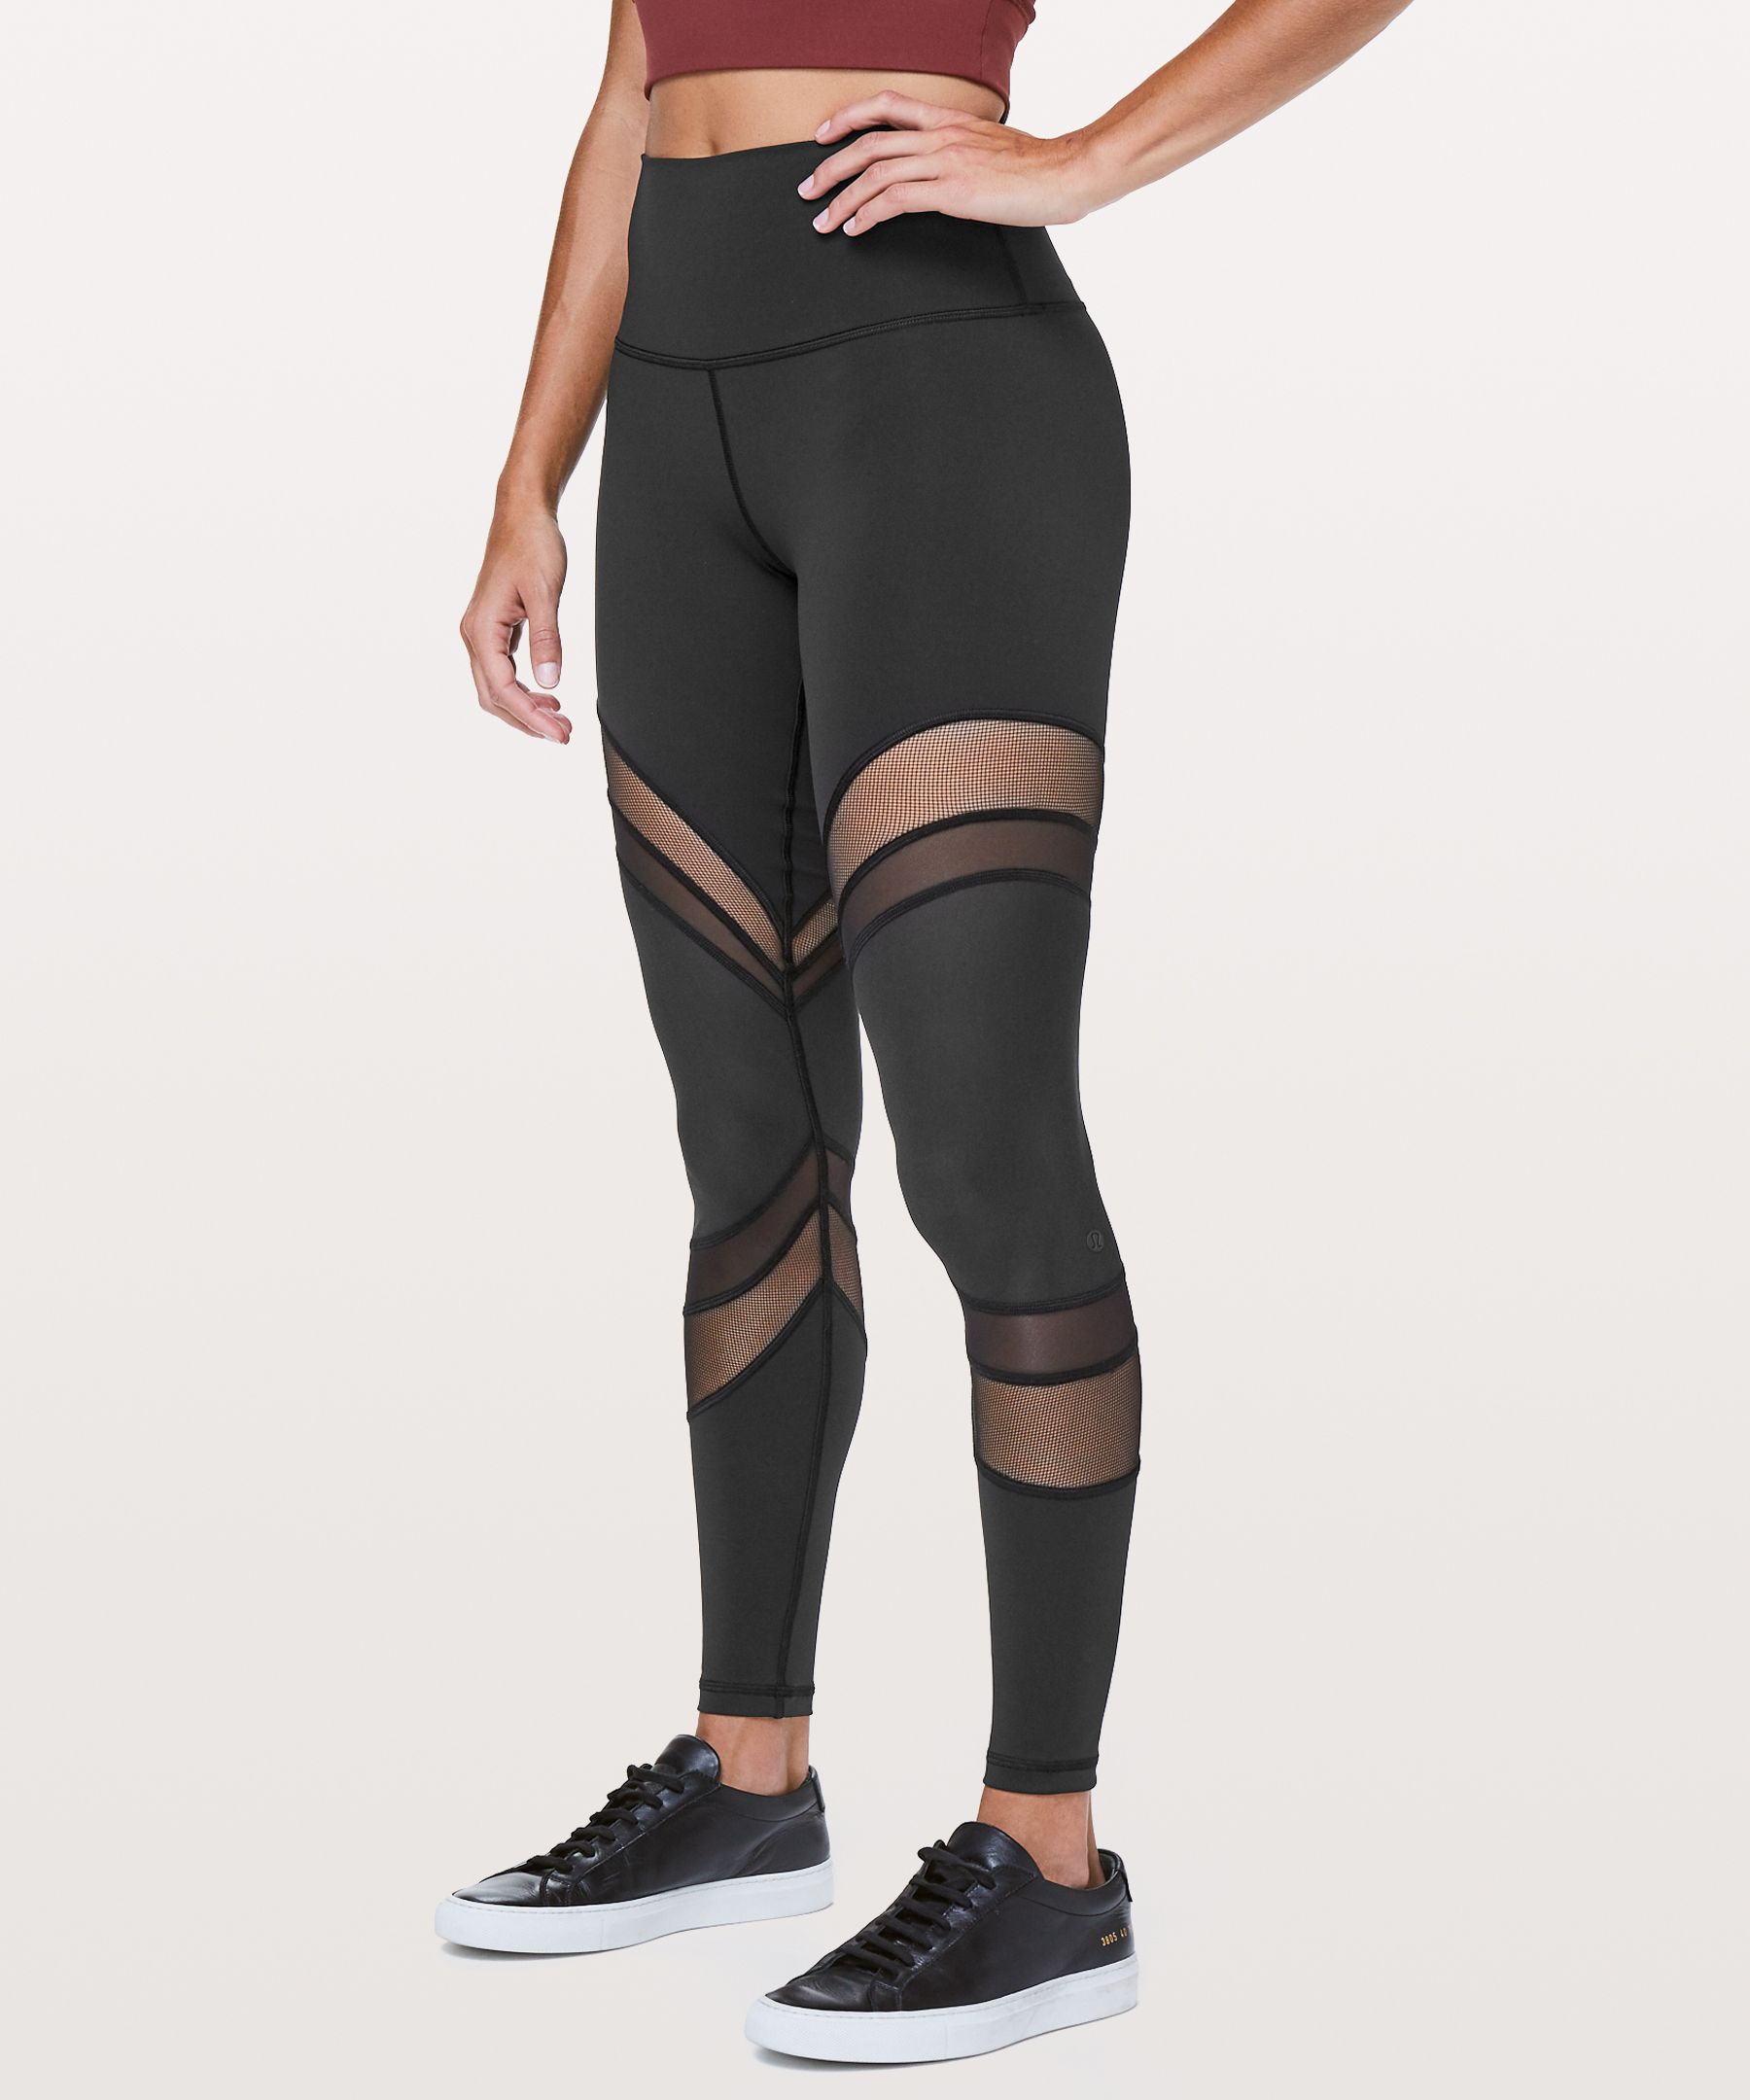 new at lululemon: SmoothCover fabric! - The Sweat Edit